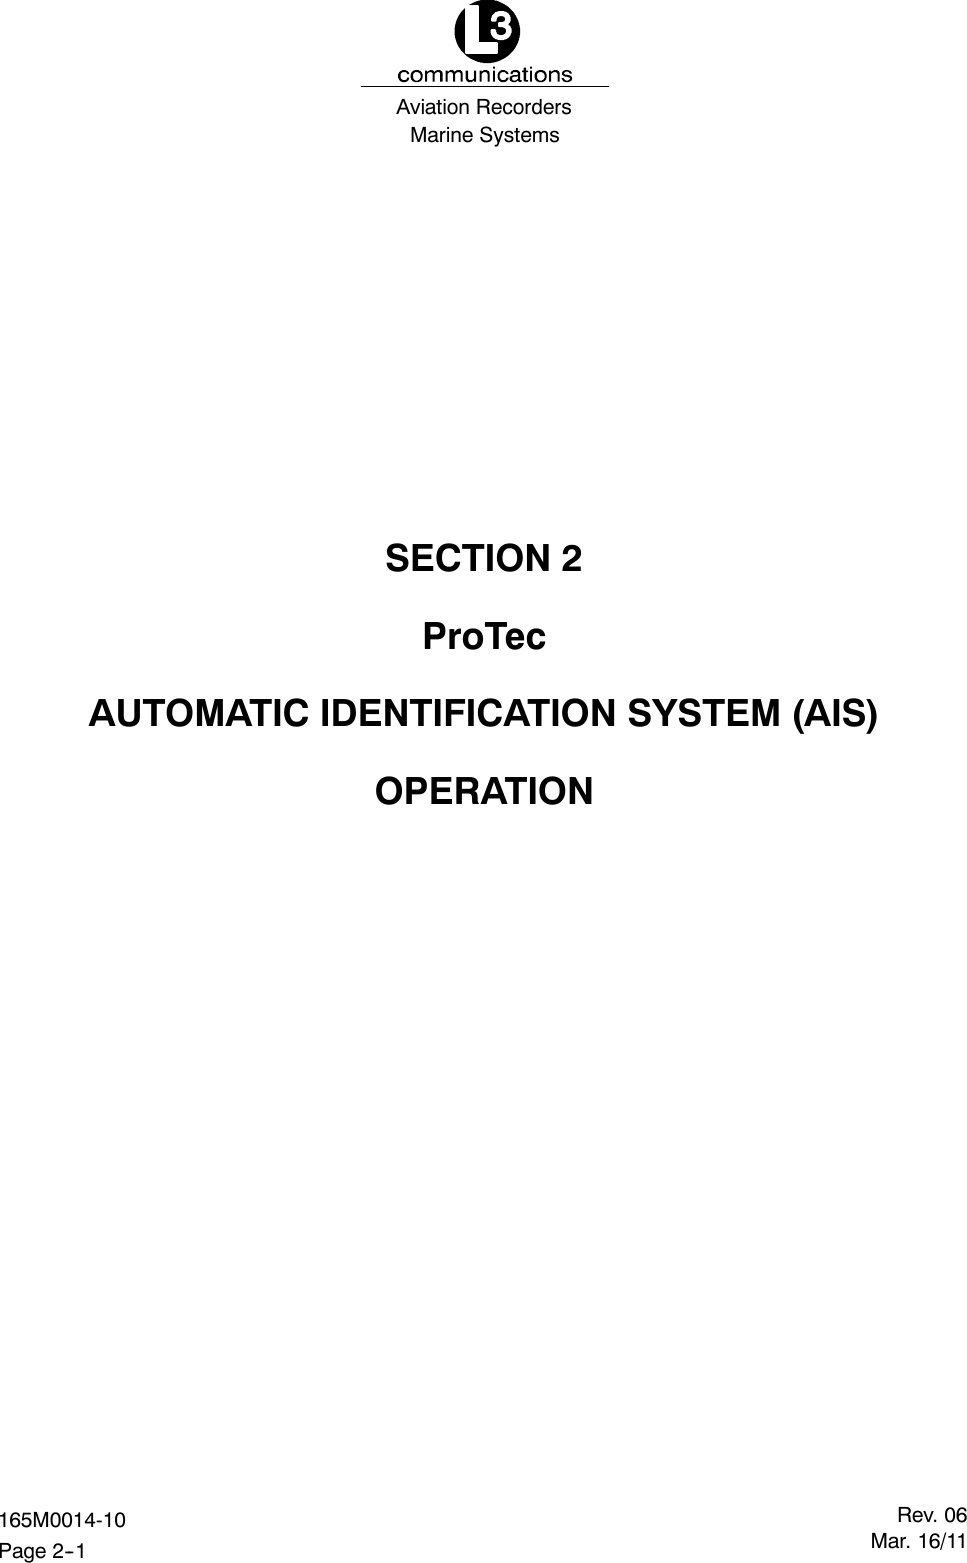 Marine SystemsAviation RecordersRev. 06Mar. 16/11165M0014-10Page 2--1SECTION 2ProTecAUTOMATIC IDENTIFICATION SYSTEM (AIS)OPERATION